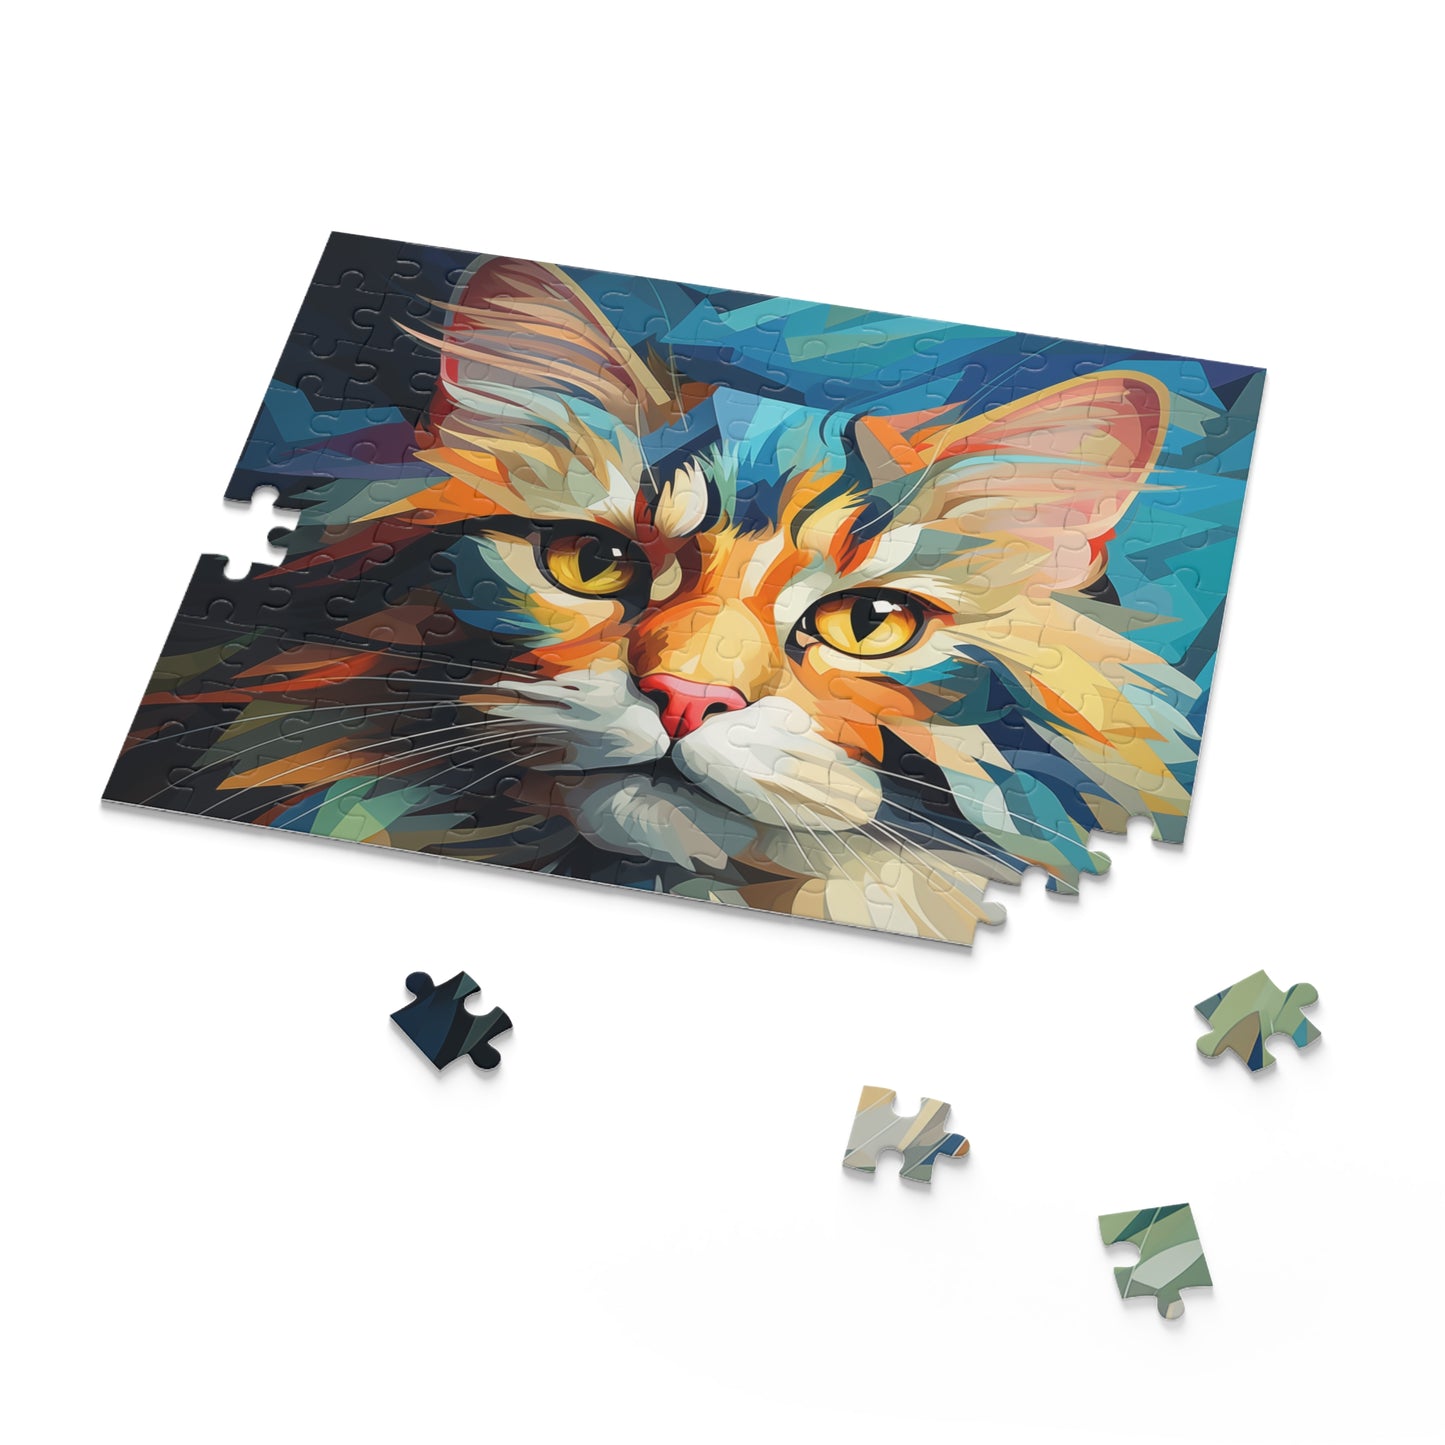 Abstract Oil Paint Watercolor Cat Jigsaw Puzzle Adult Birthday Business Jigsaw Puzzle Gift for Him Funny Humorous Indoor Outdoor Game Gift For Her Online-7